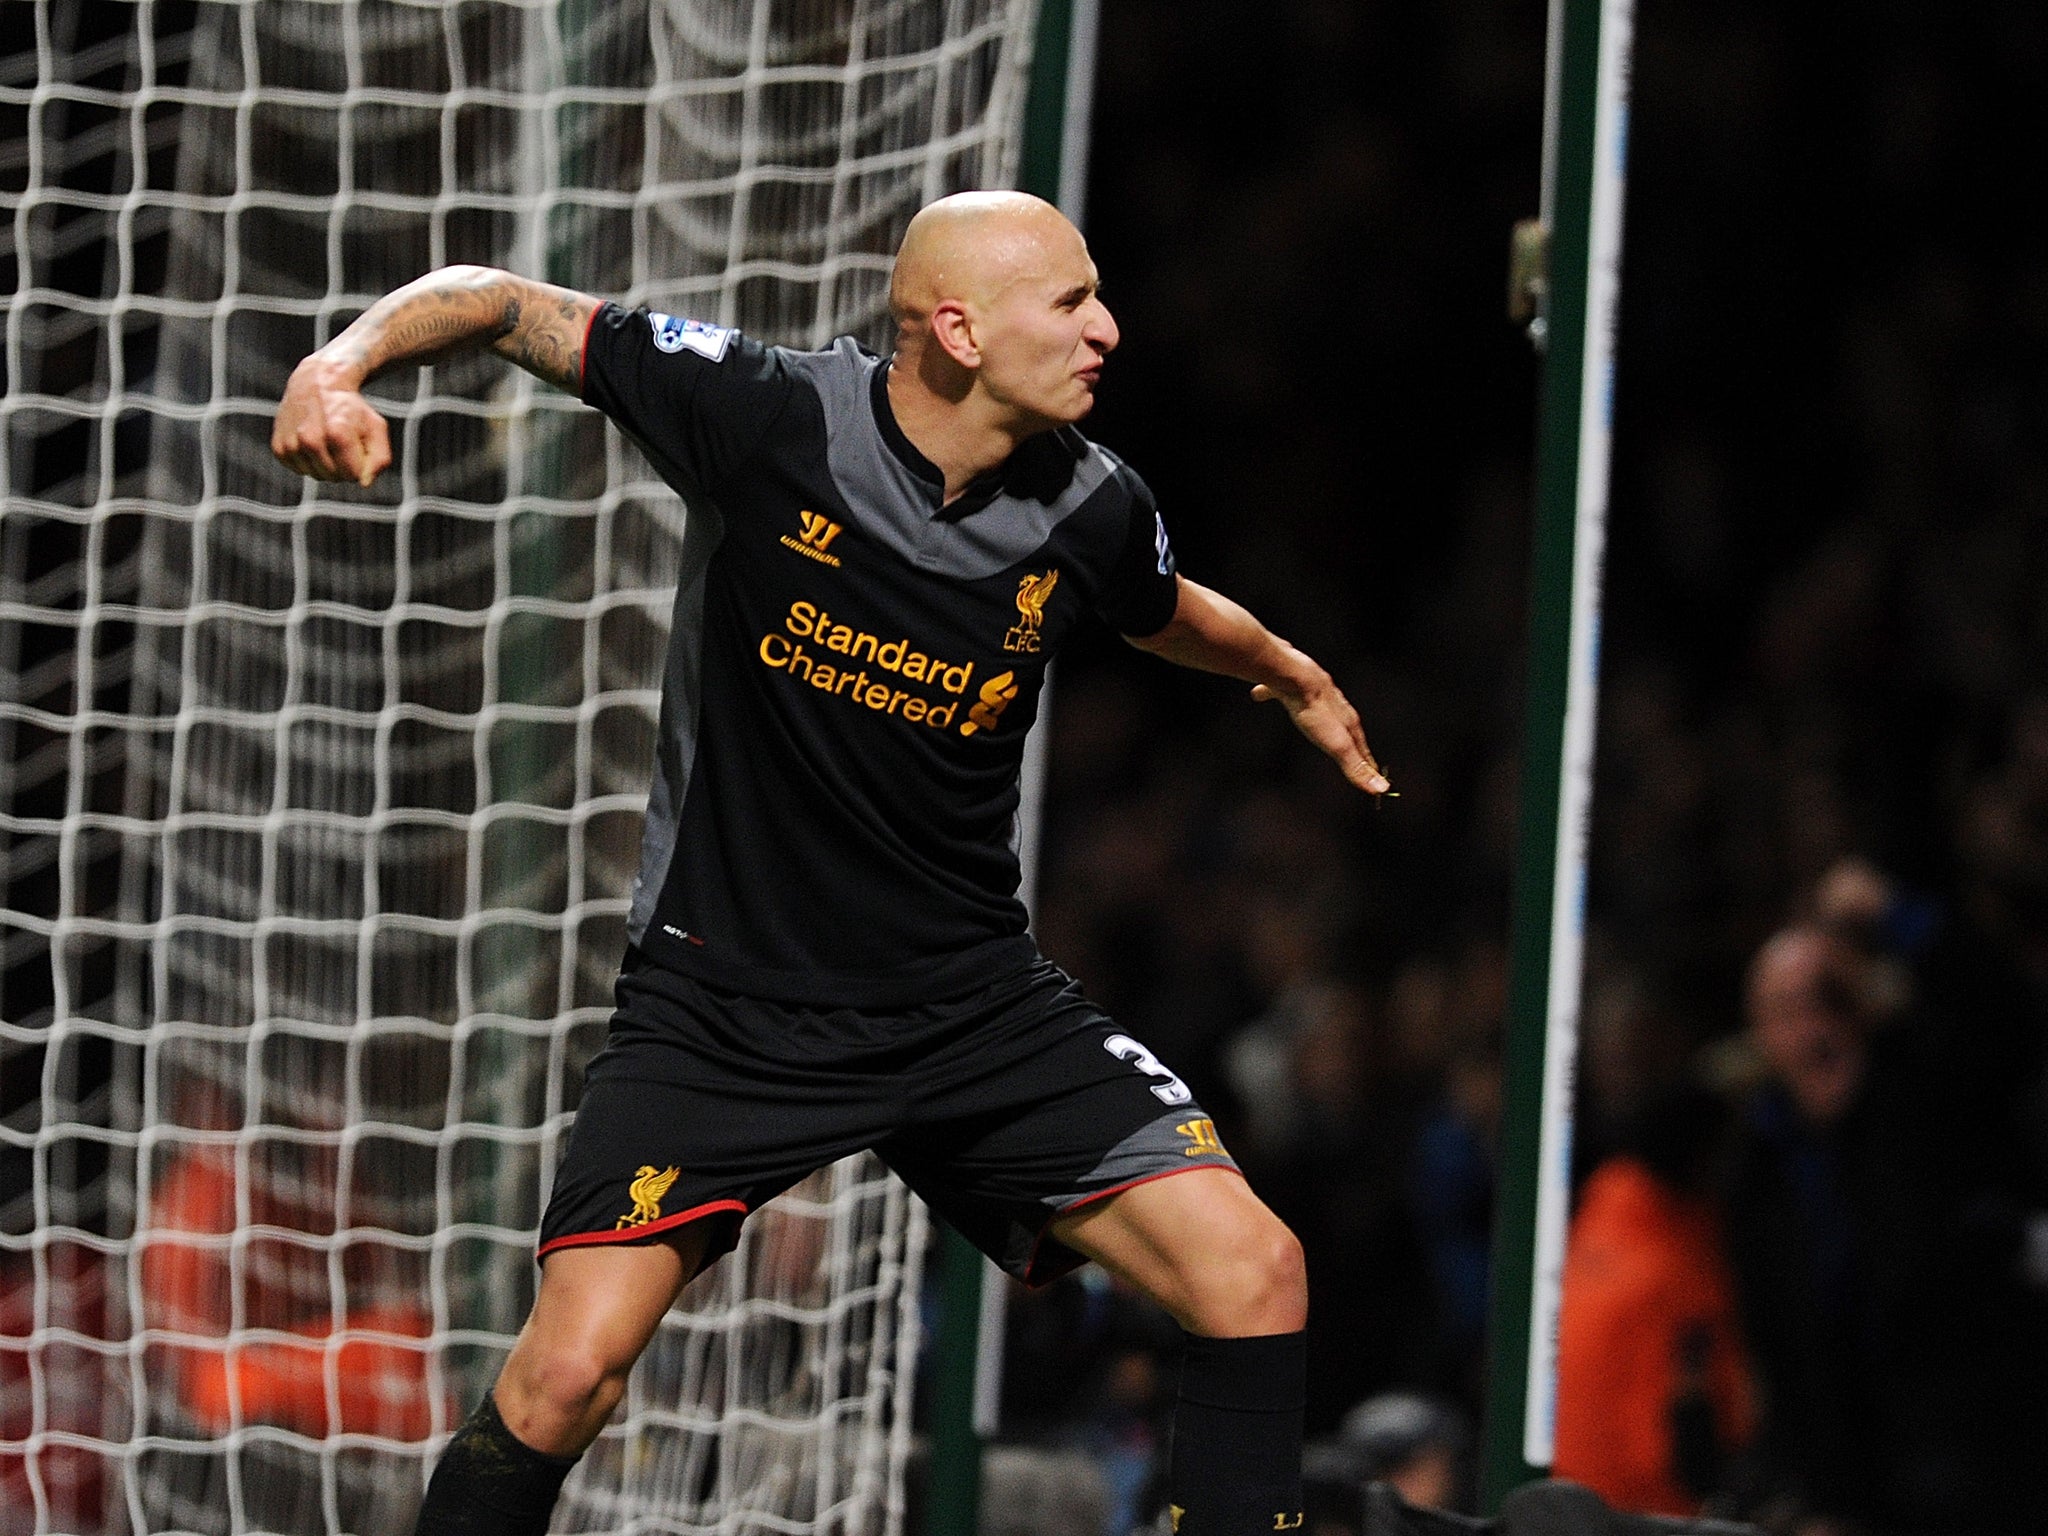 Jonjo Shelvey looks set to leave Liverpool with a move to Swansea being reported